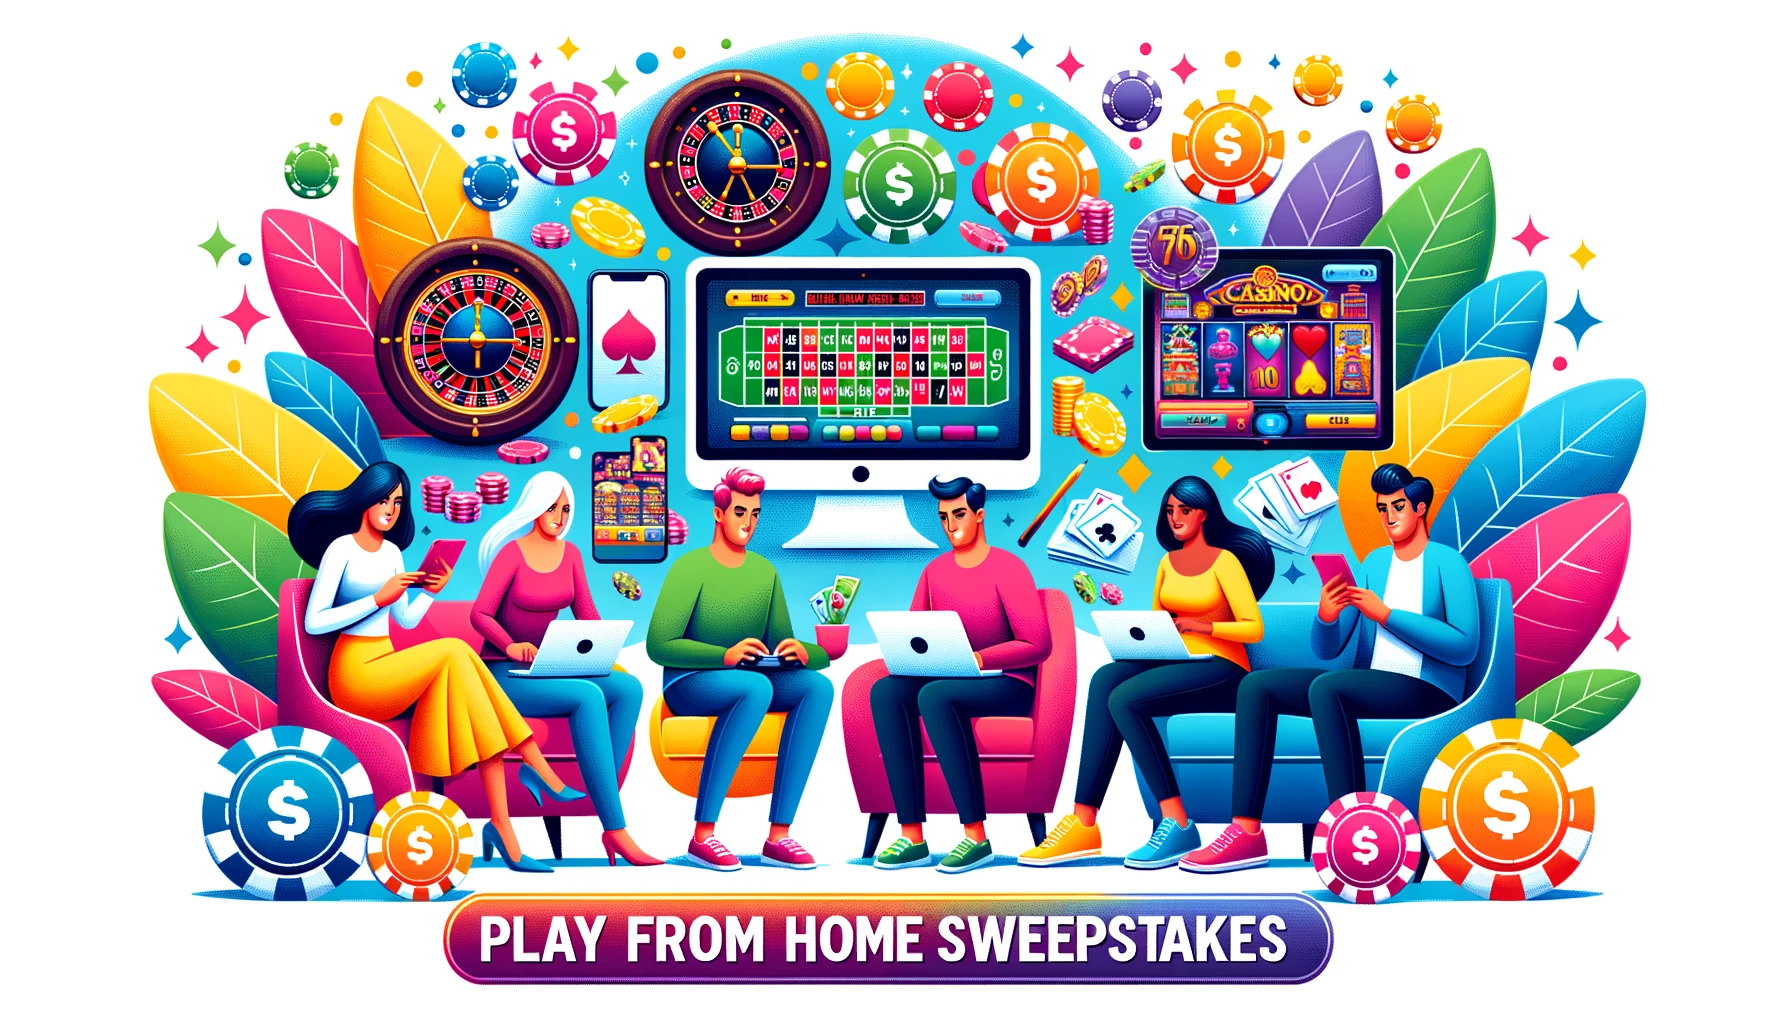 Play from home sweepstakes casinos